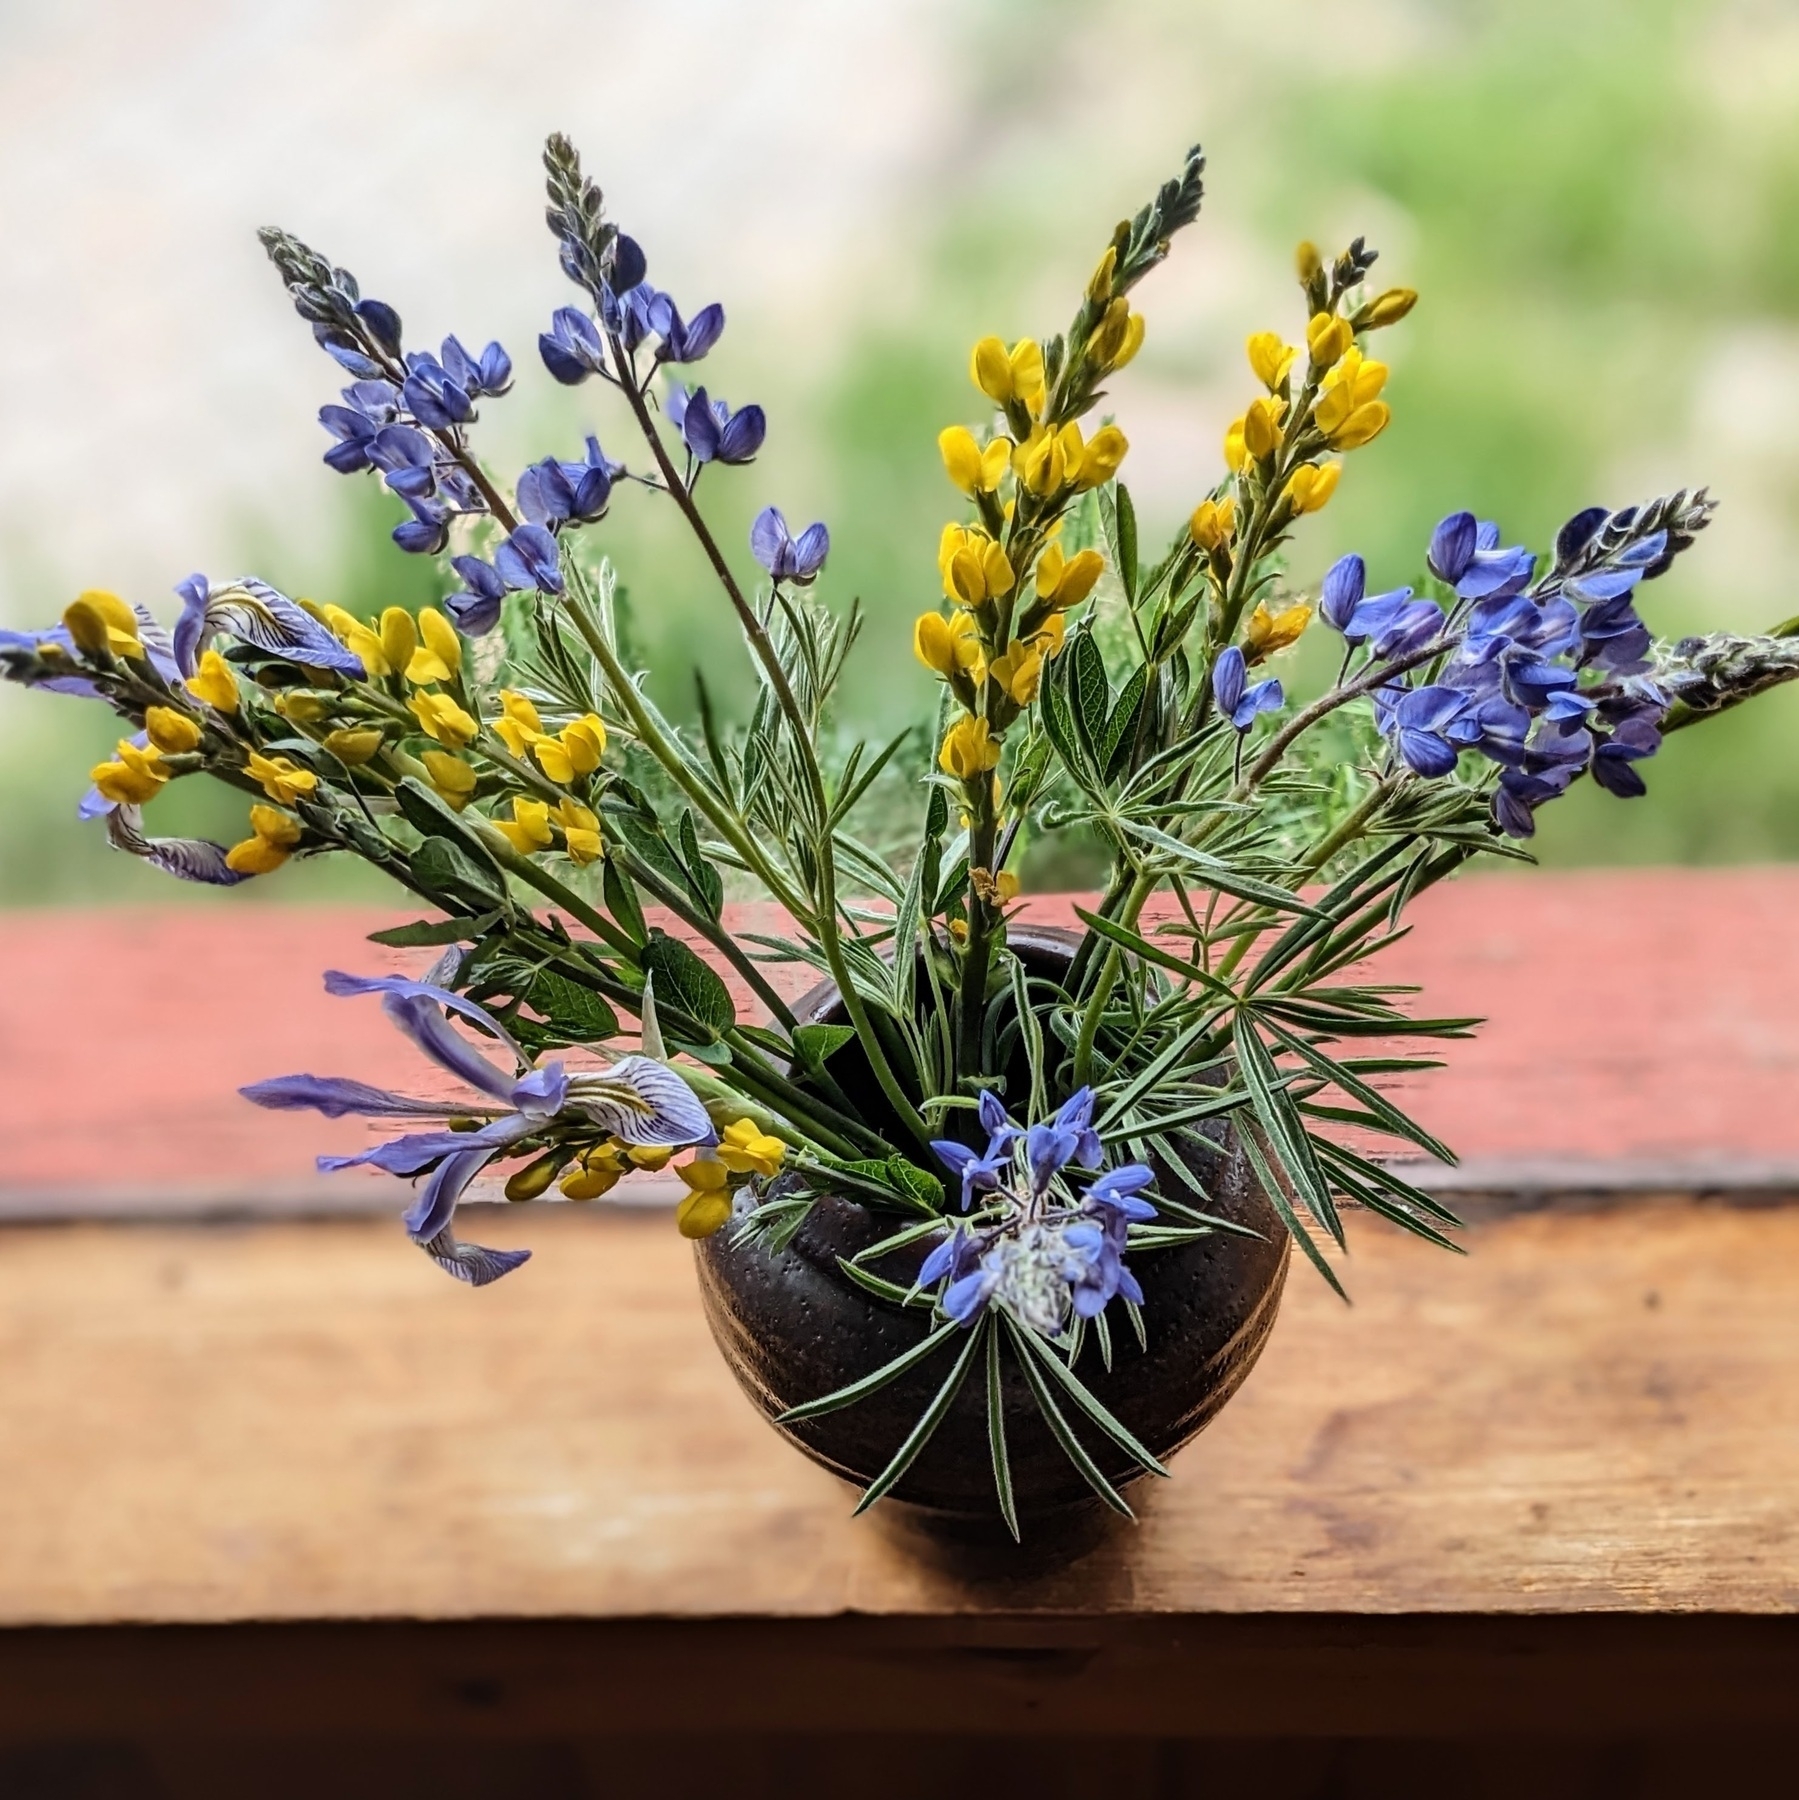 brown hand-thrown pottery vase placed on a window sill and filled with wildflowers: yellow flowers, blue lupine, and one blue wild iris